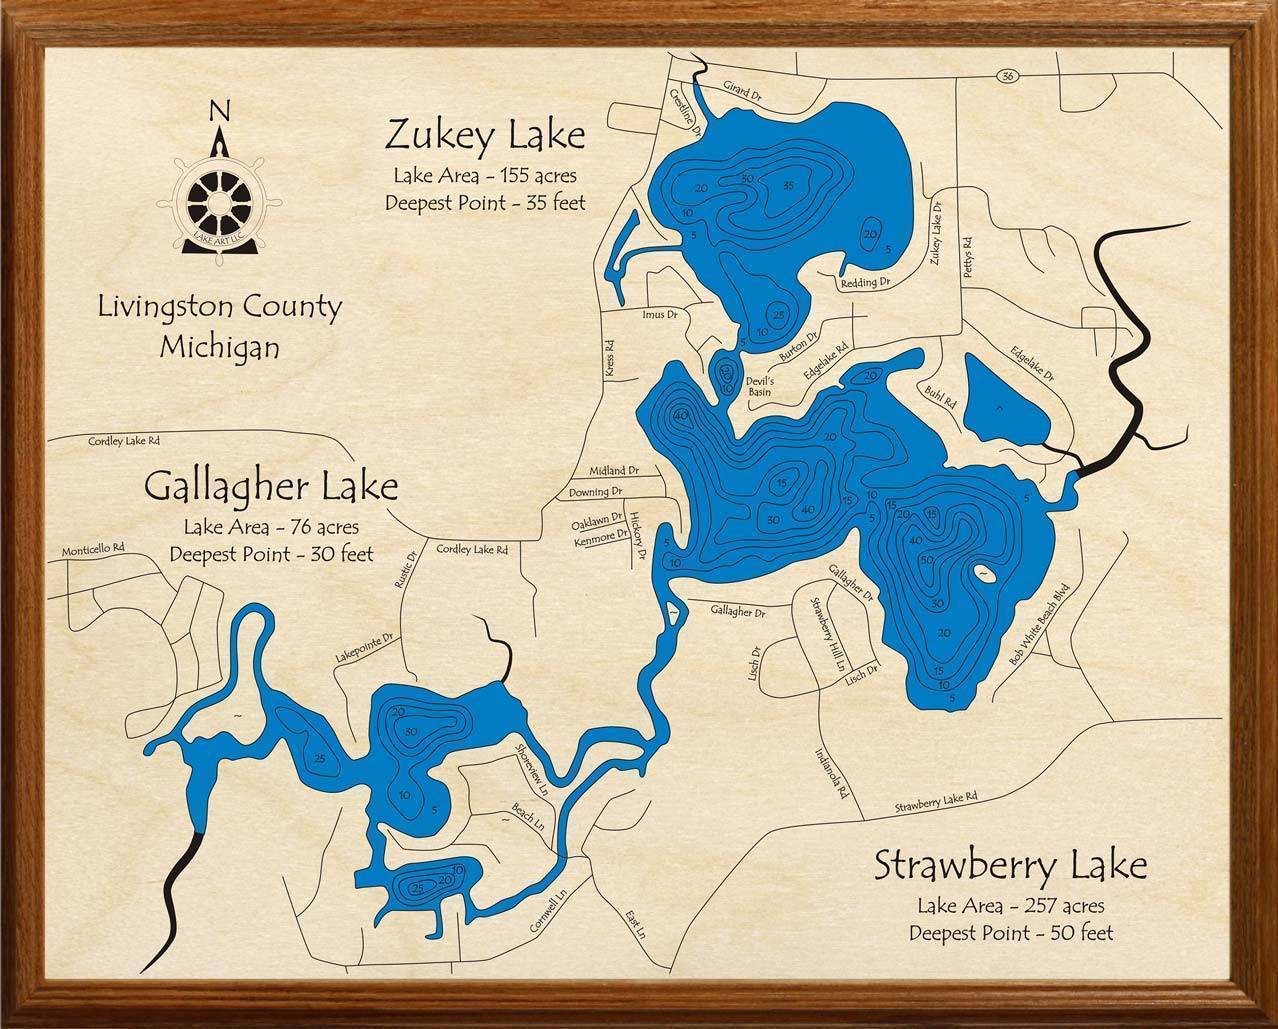 Zukey Lake (With Gallagher and Strawberry Lakes) | Lakehouse Lifestyle